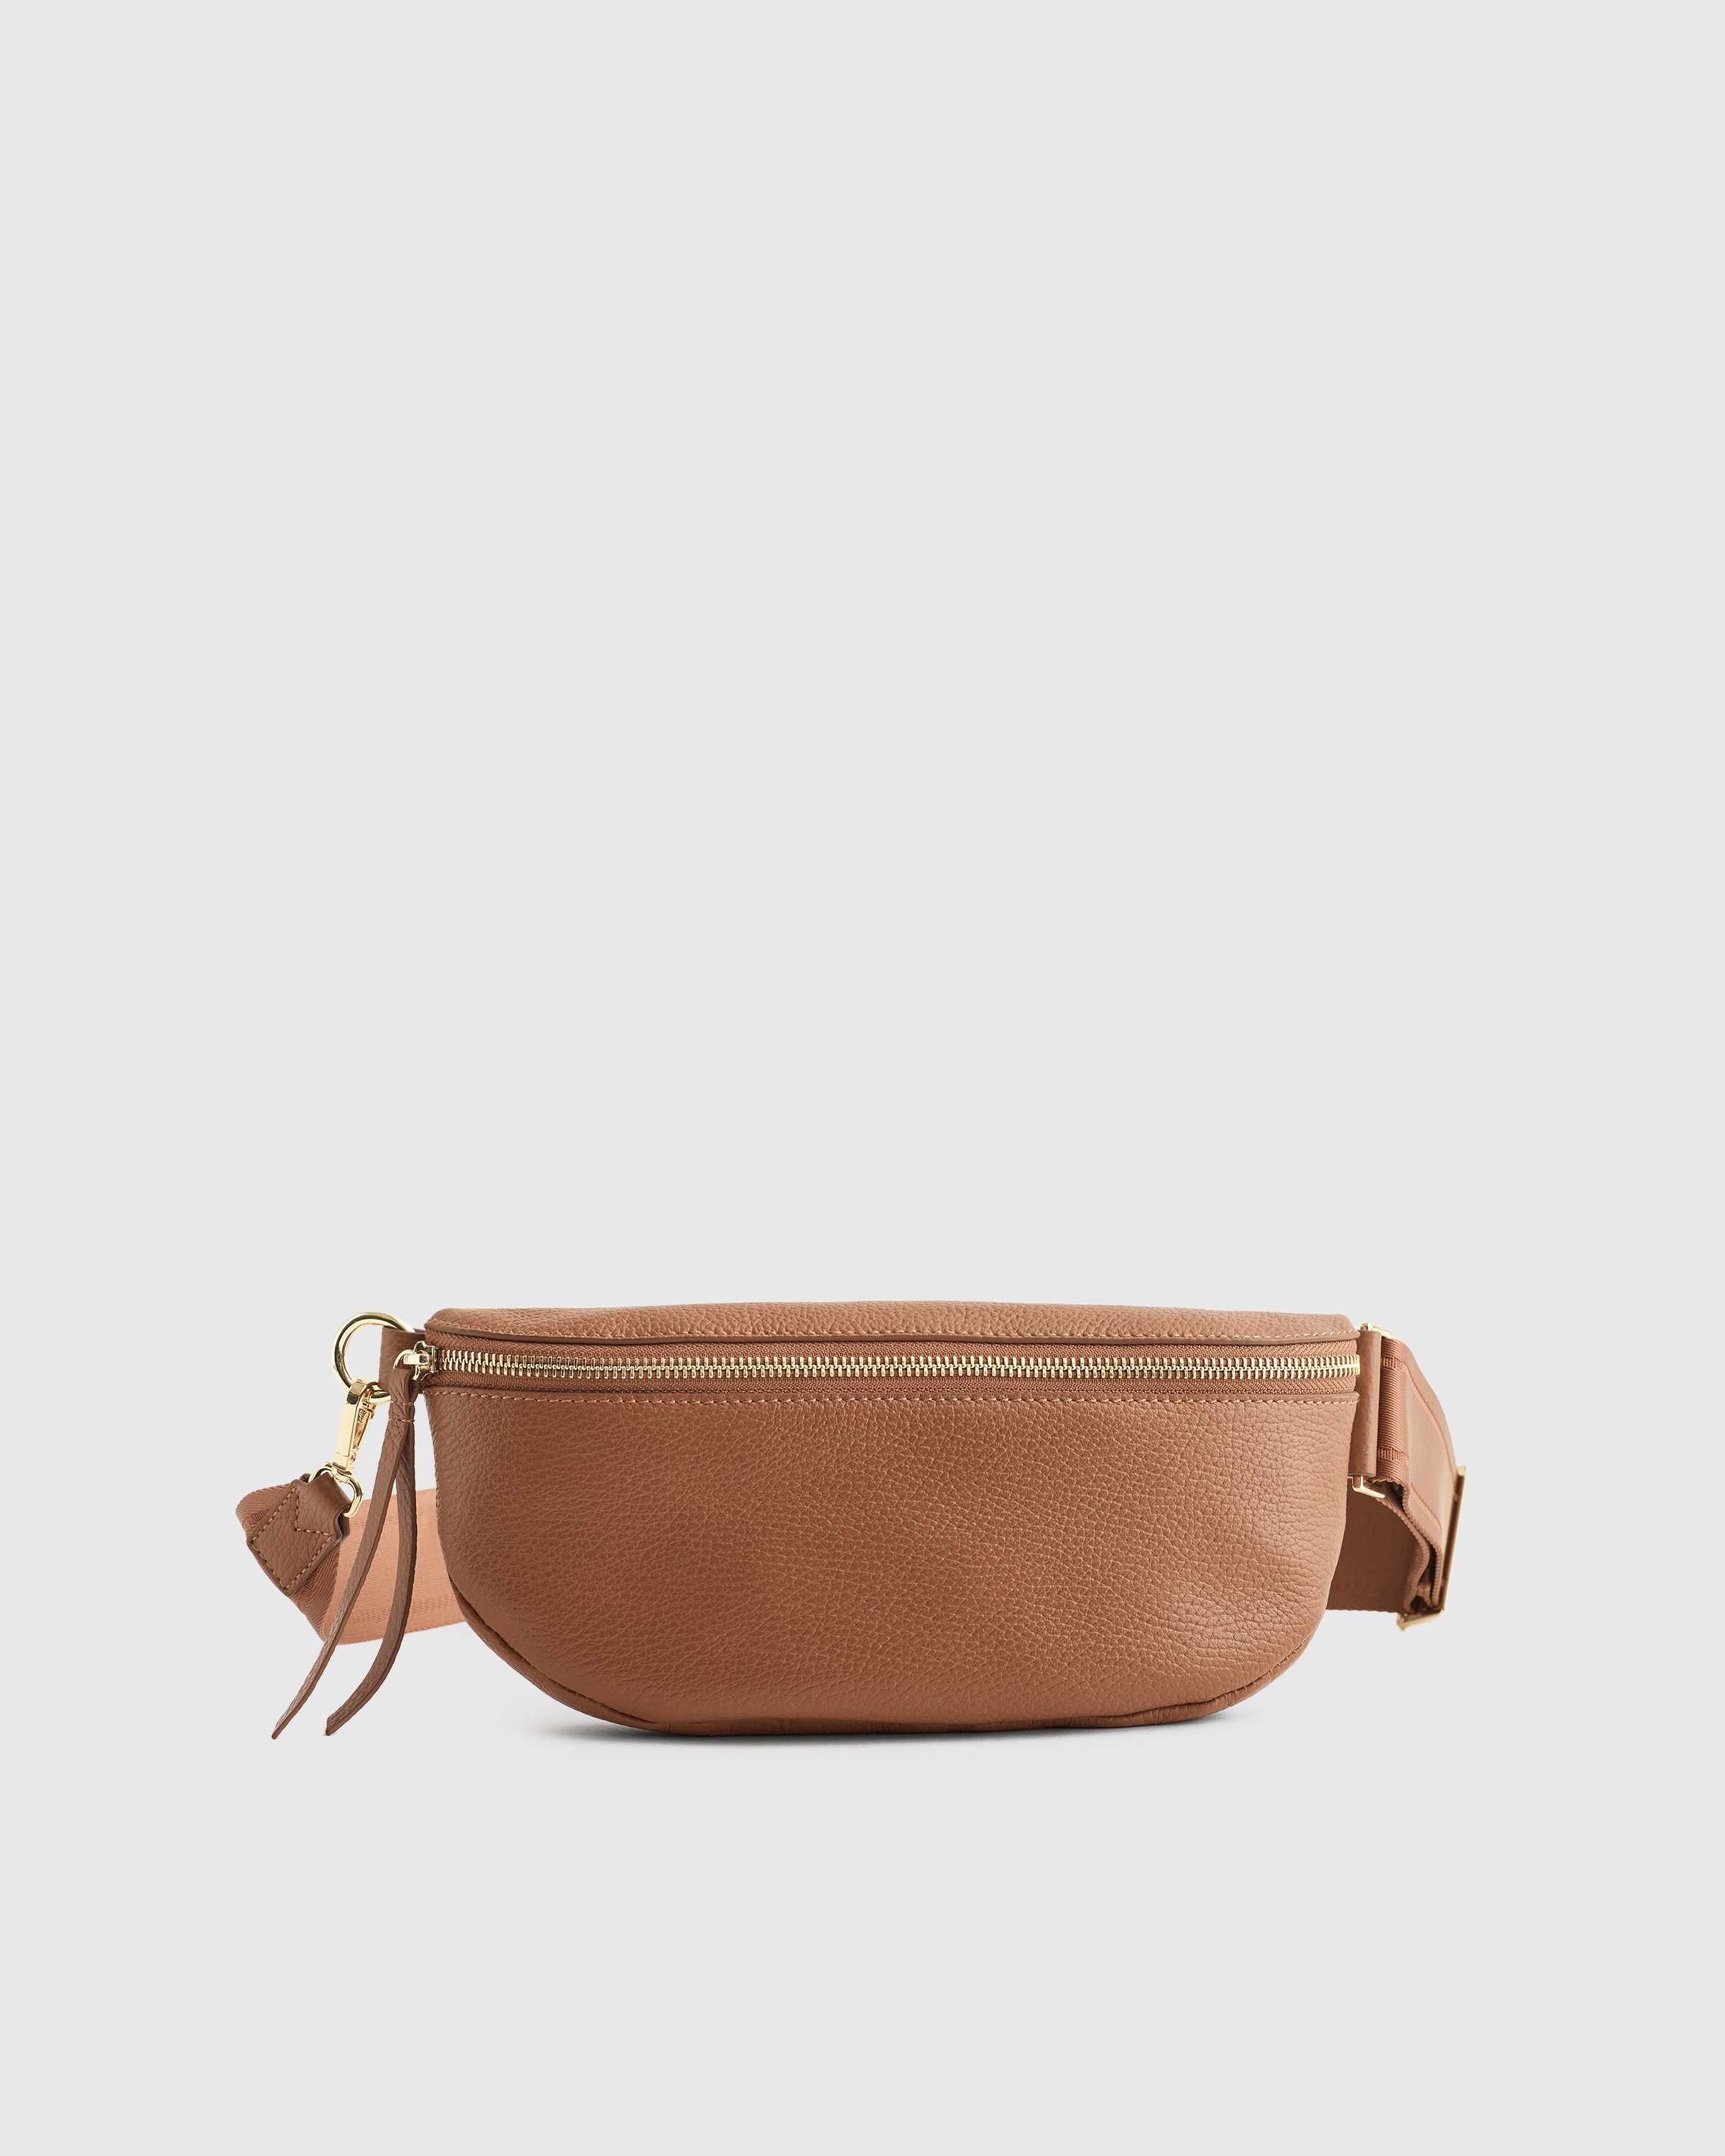 Quince | Women's Italian Pebbled Leather Sling Bag in Cognac, Italian Leather